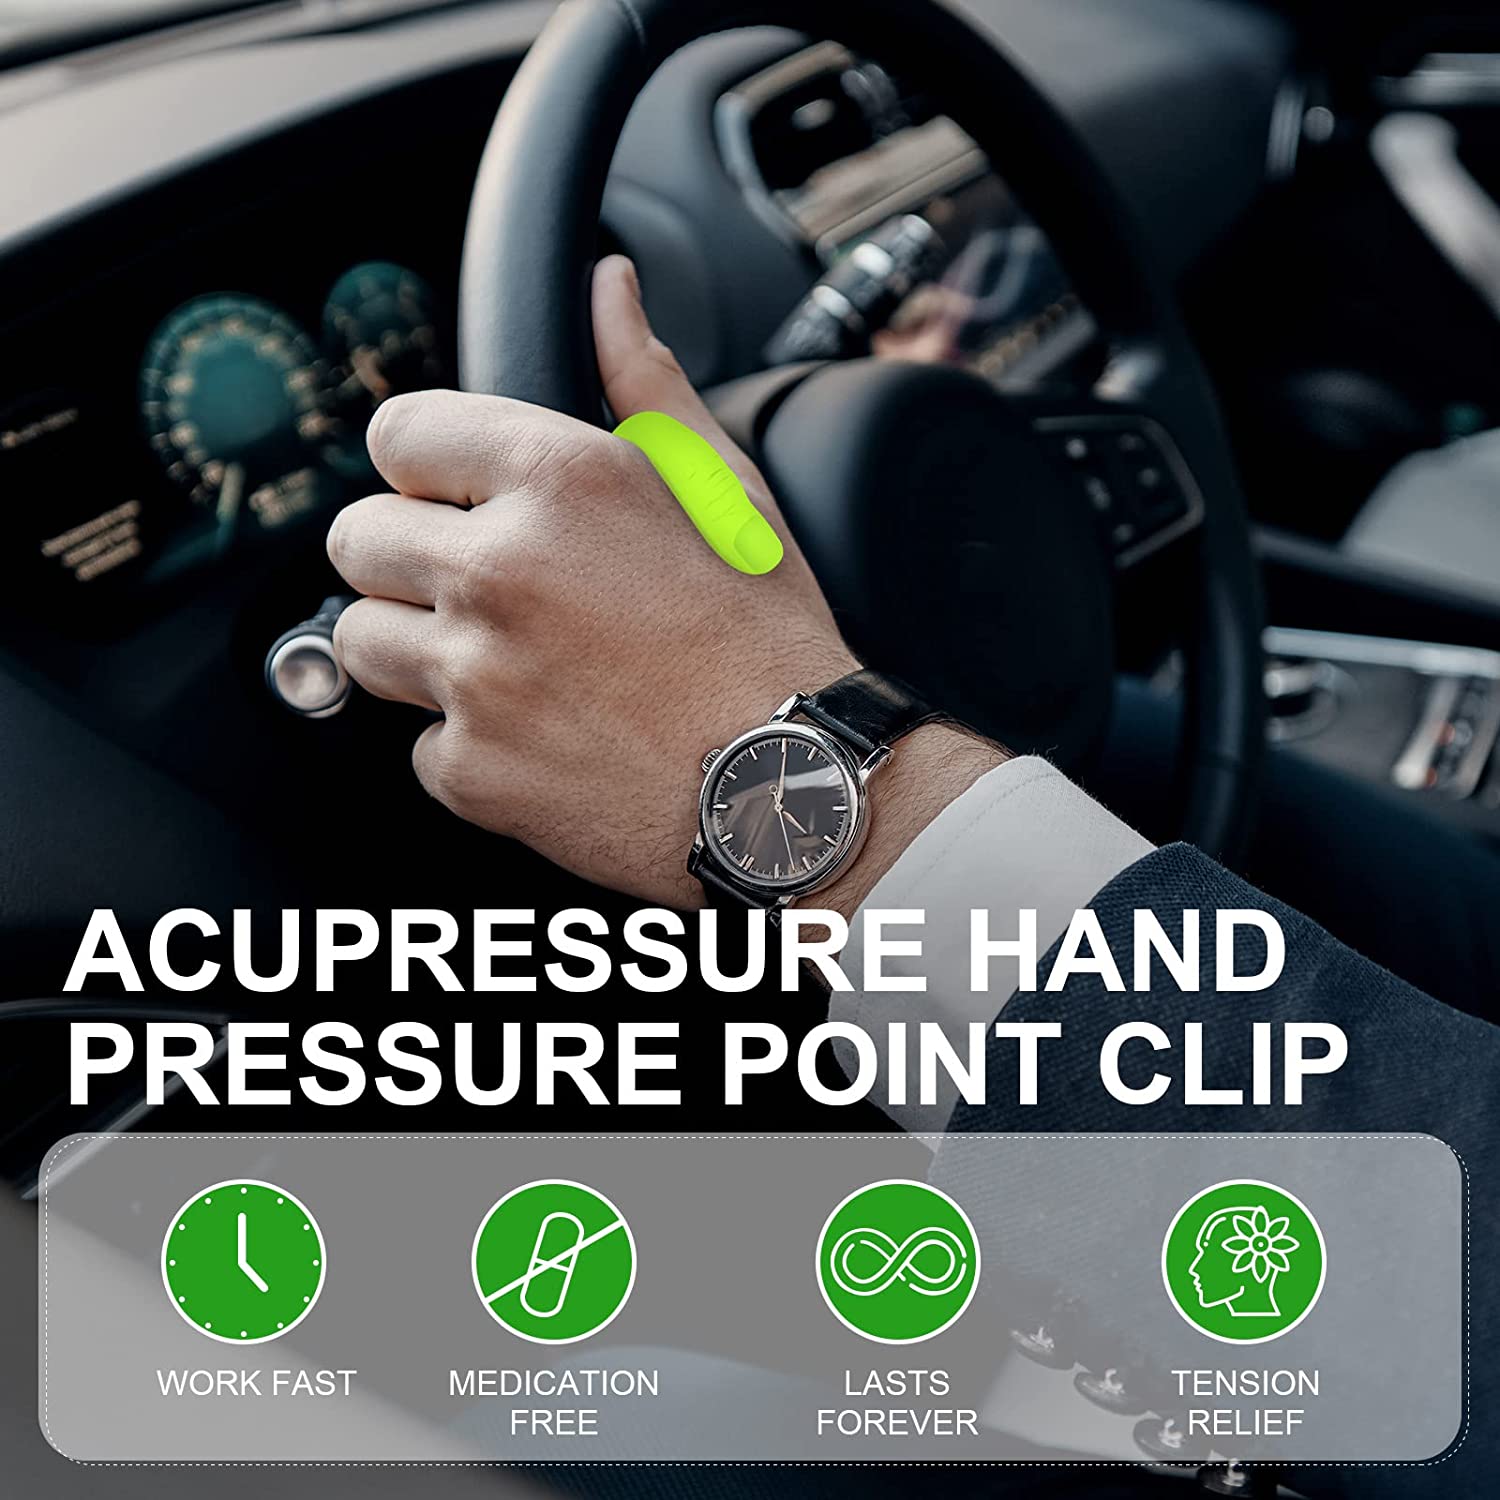 Relieve Headache Tension With This Wearable Acupressure - Temu